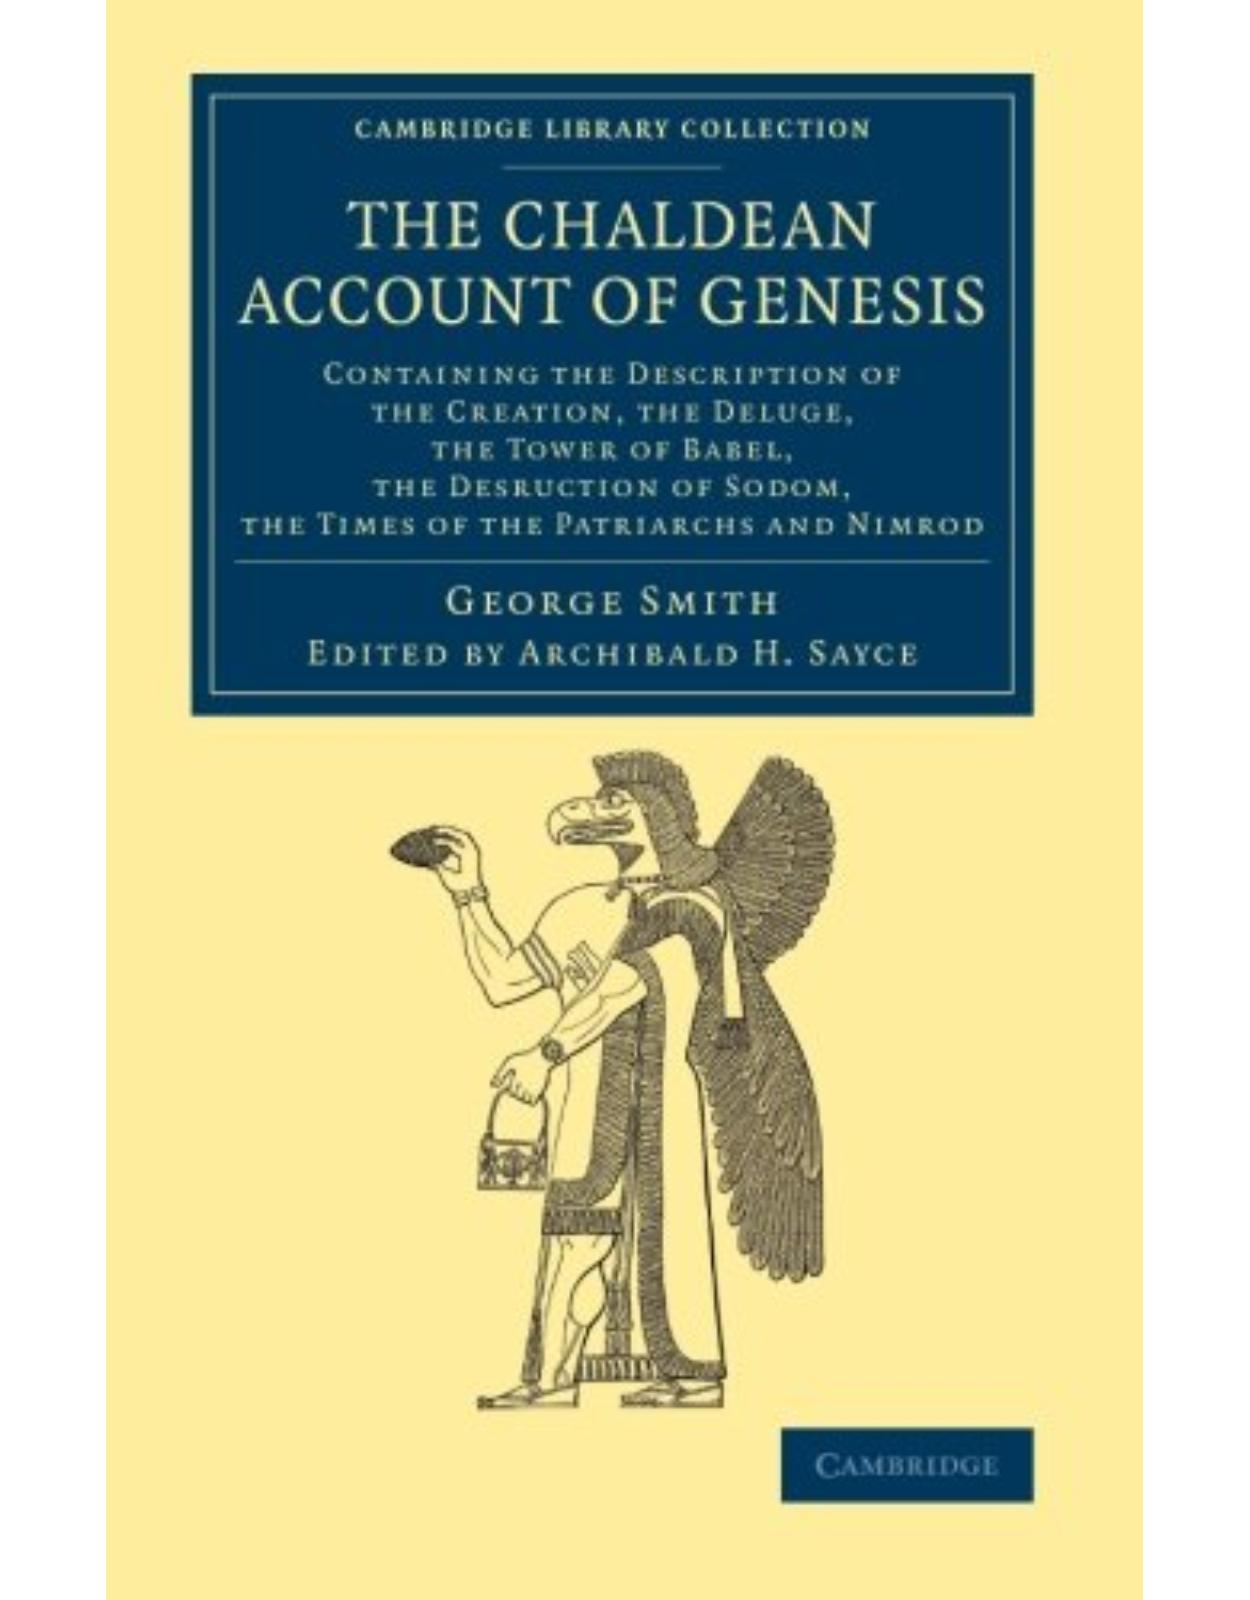 The Chaldean Account of Genesis: Containing the Description of the Creation, the Fall of Man, the Deluge, the Tower of Babel, the Desruction of Sodom, ... (Cambridge Library Collection - Archaeology)